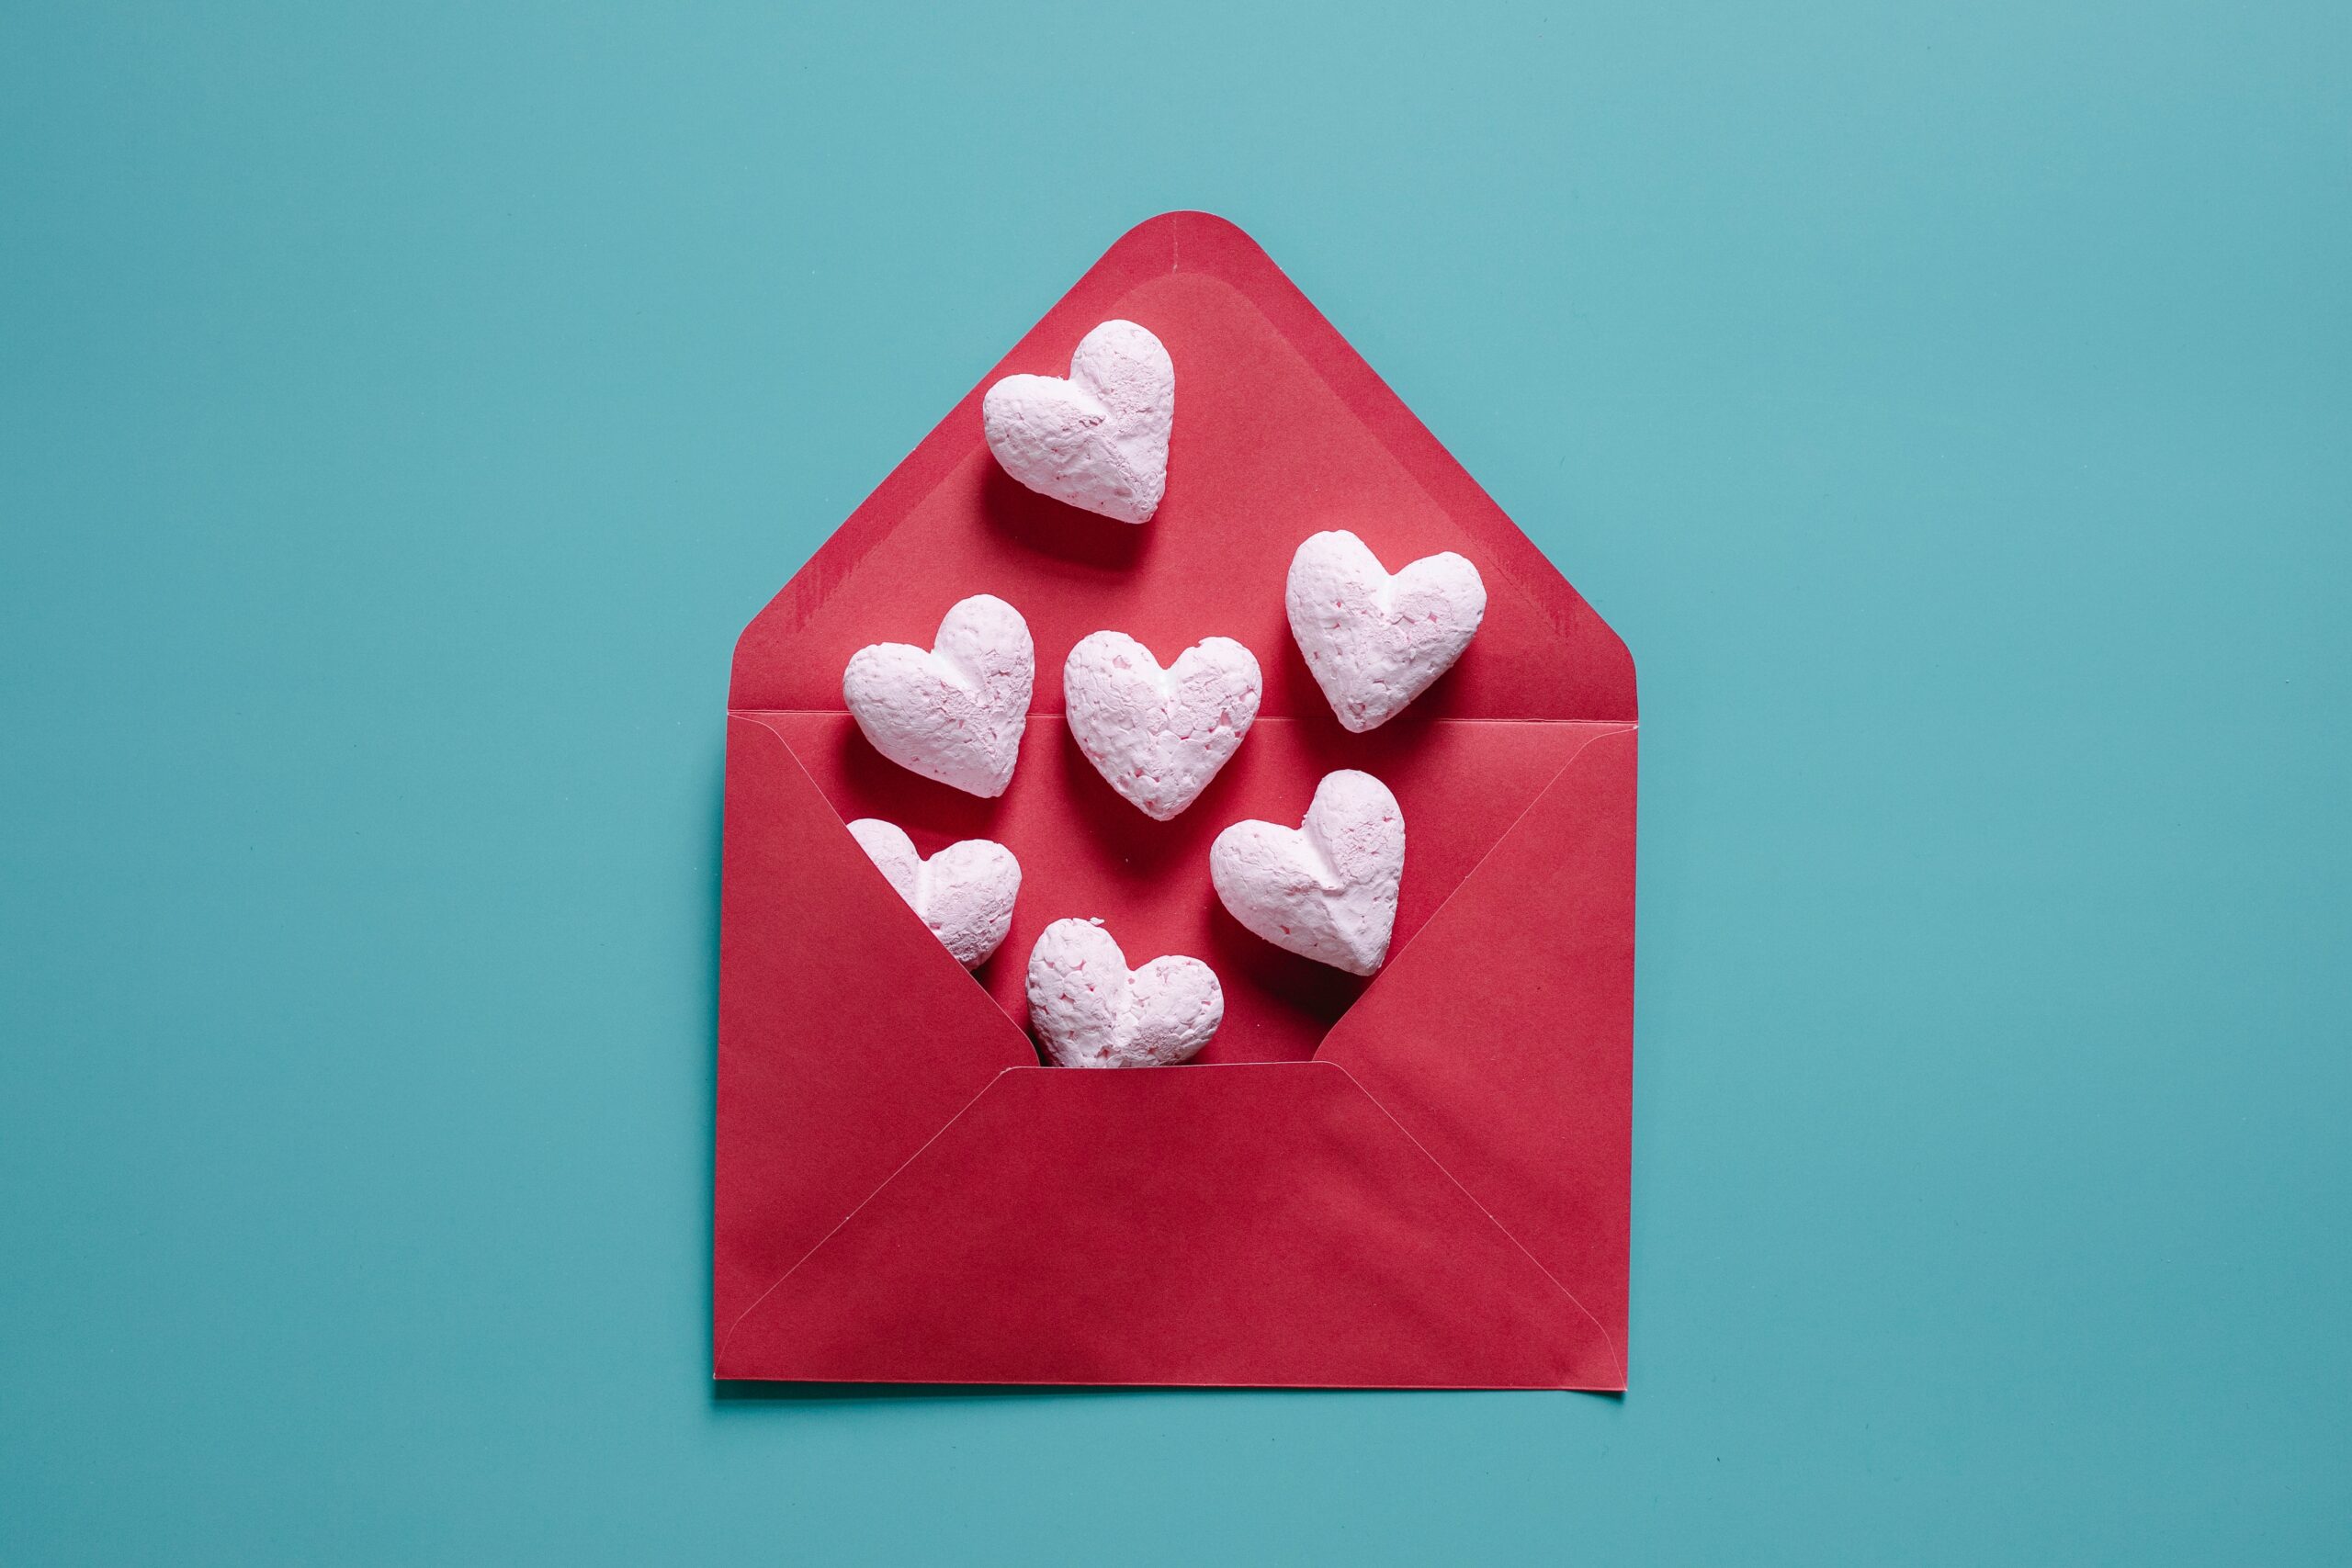 VALENTINE’S DAY IDEAS FOR KIDS: TEACHING THE MEANING OF LOVE